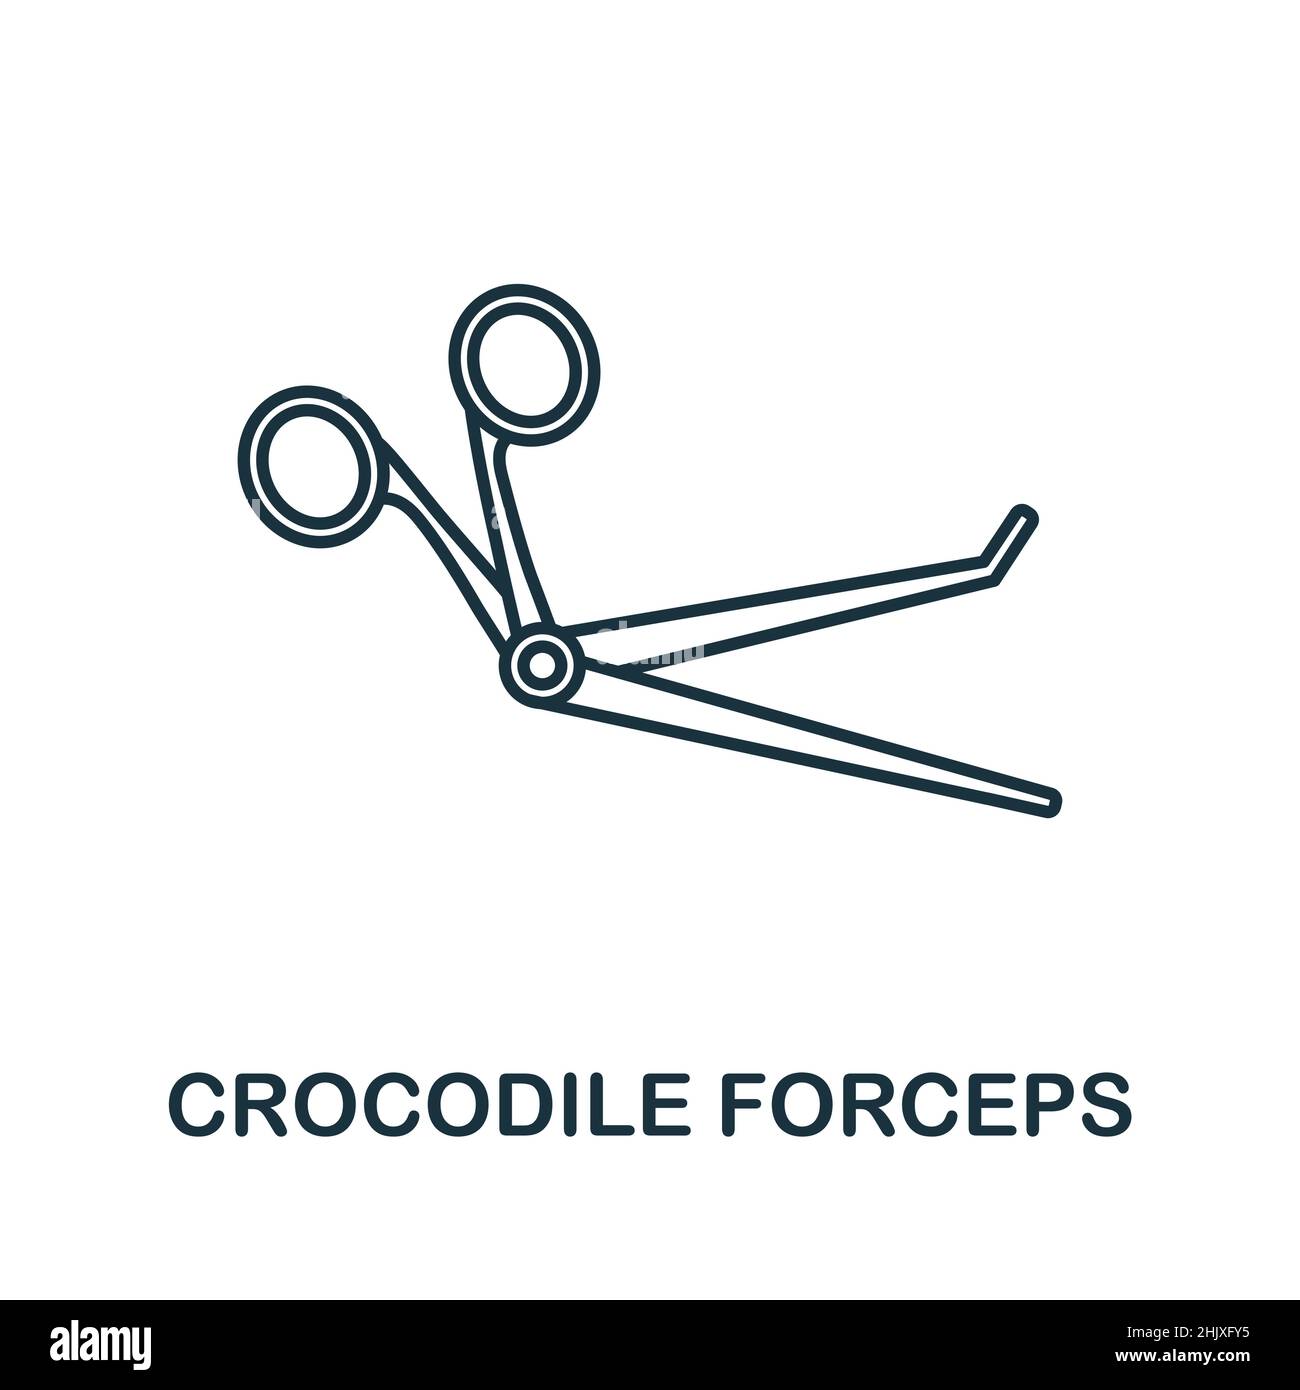 Crocodile Forceps icon. Line element from medical equipment collection. Linear Crocodile Forceps icon sign for web design, infographics and more. Stock Vector